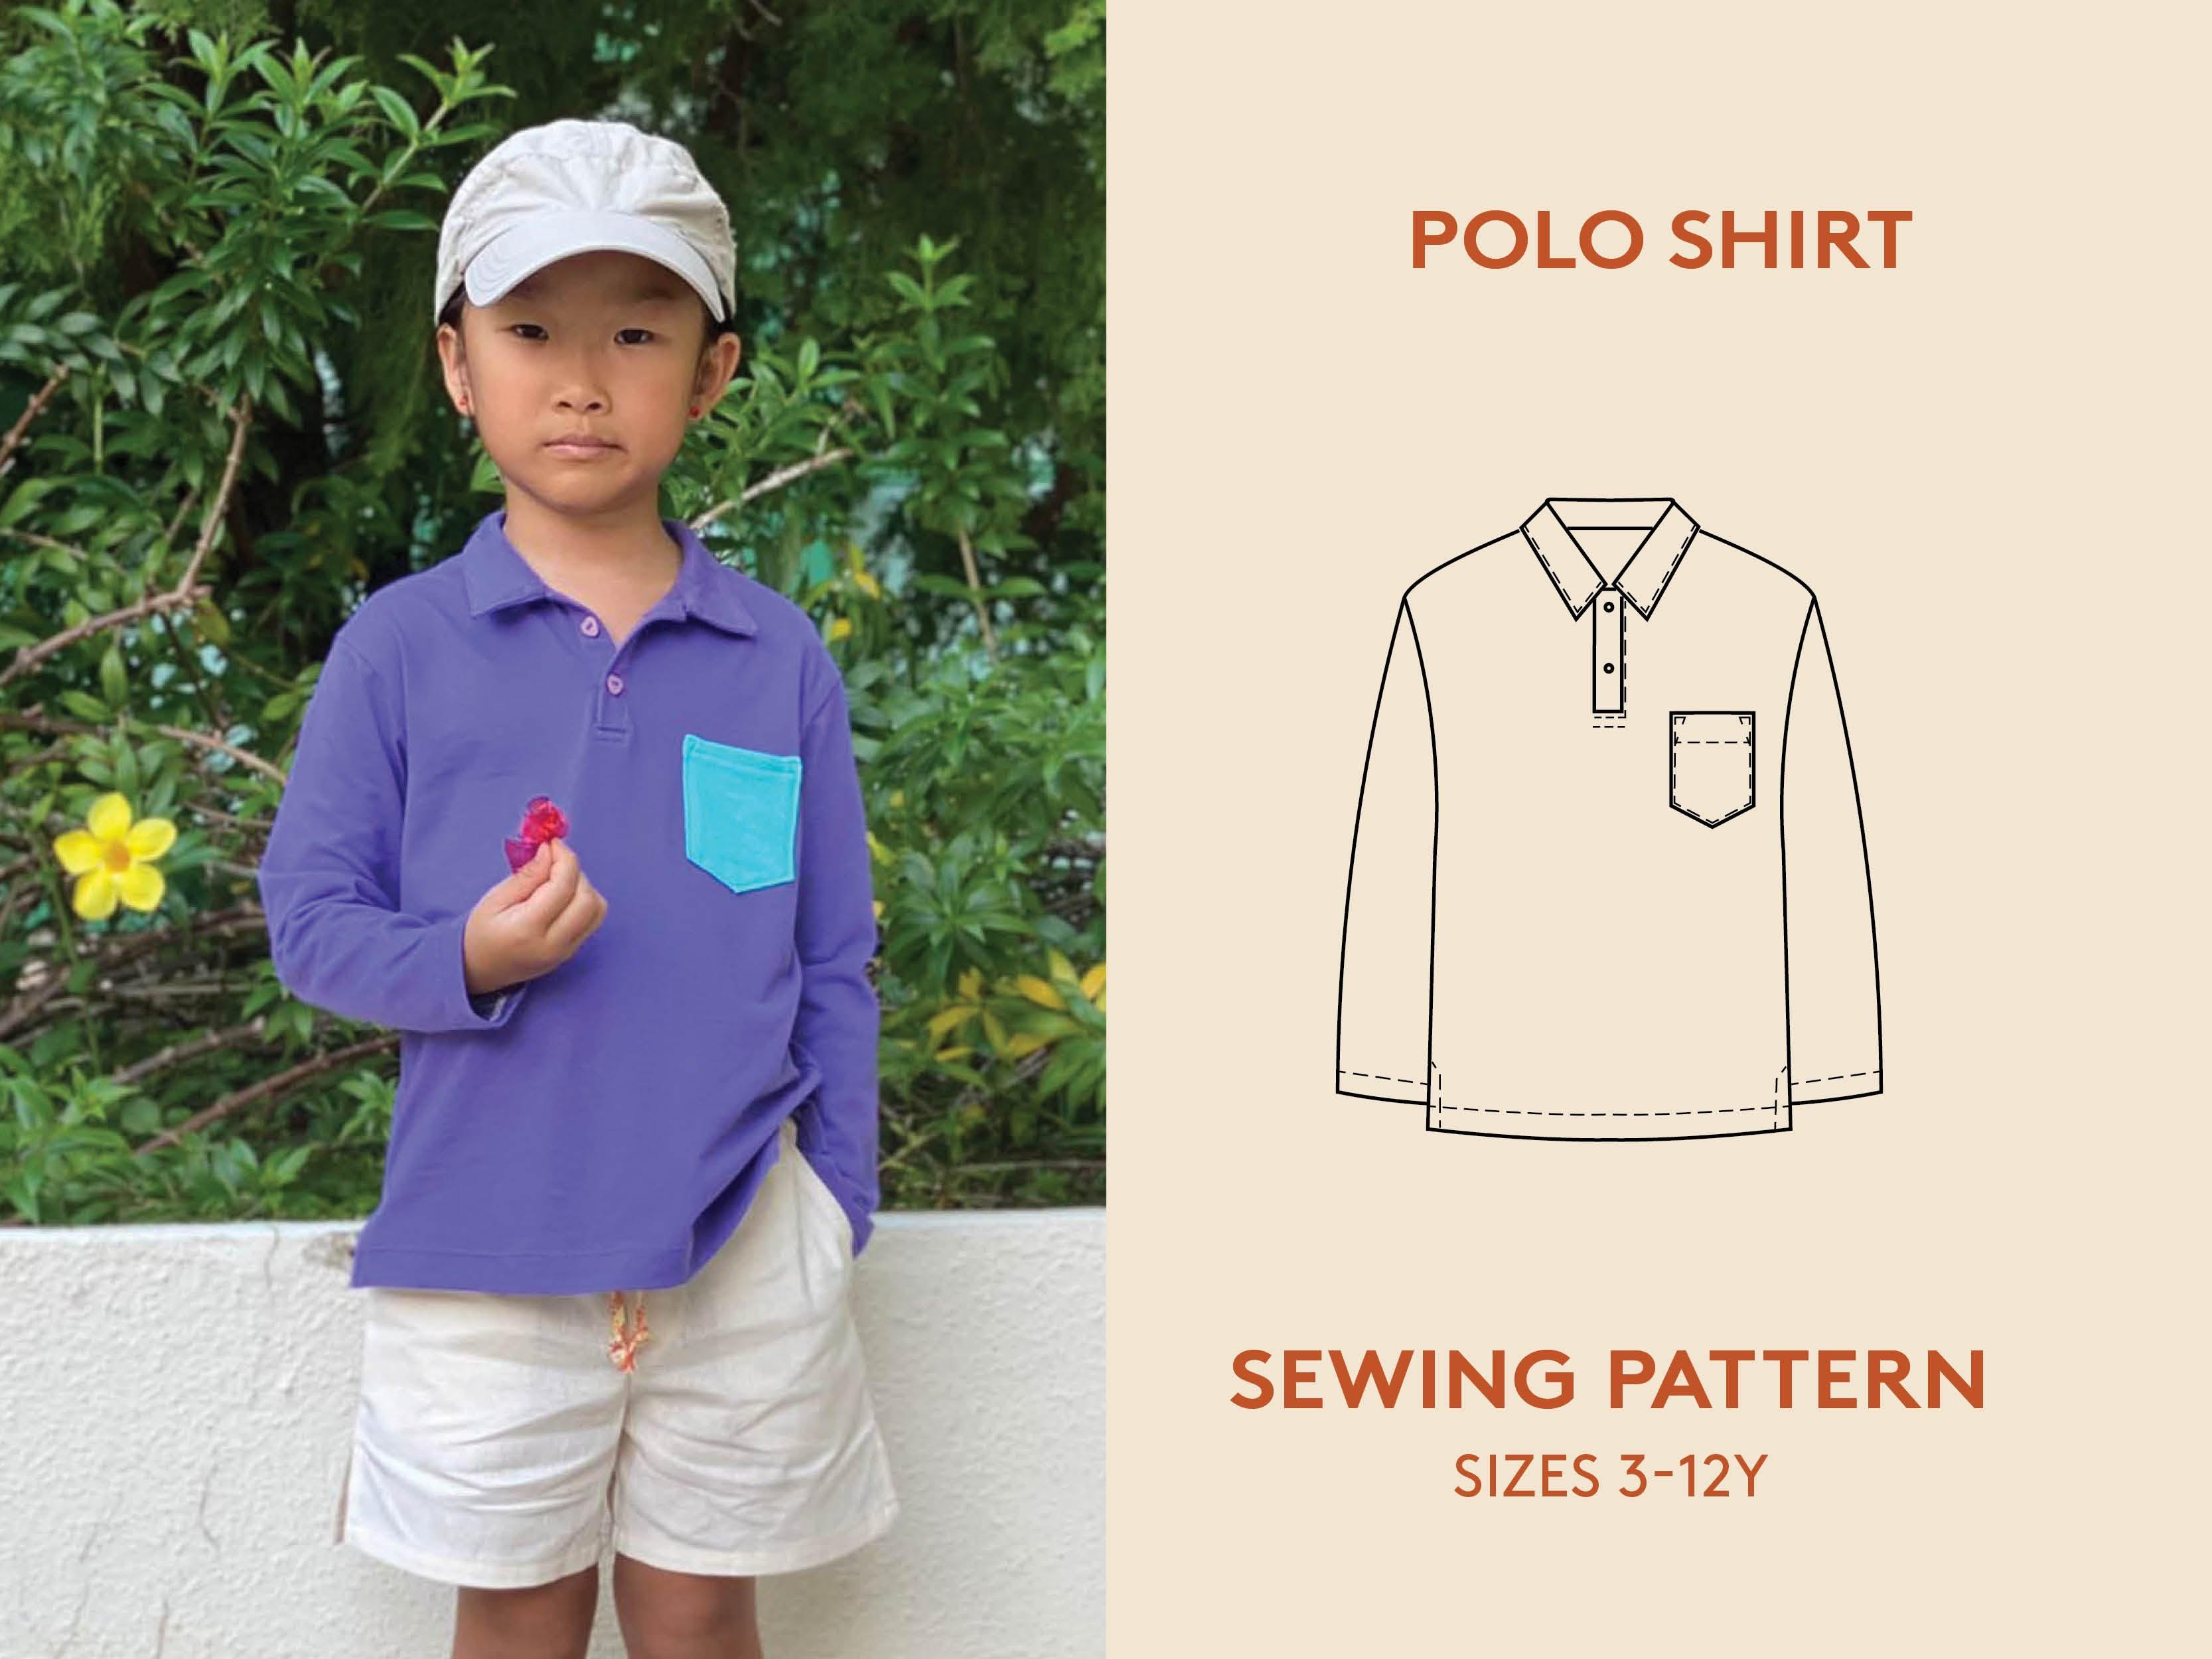 Kid's Polo Shirt sewing pattern | Wardrobe By Me - We love sewing!